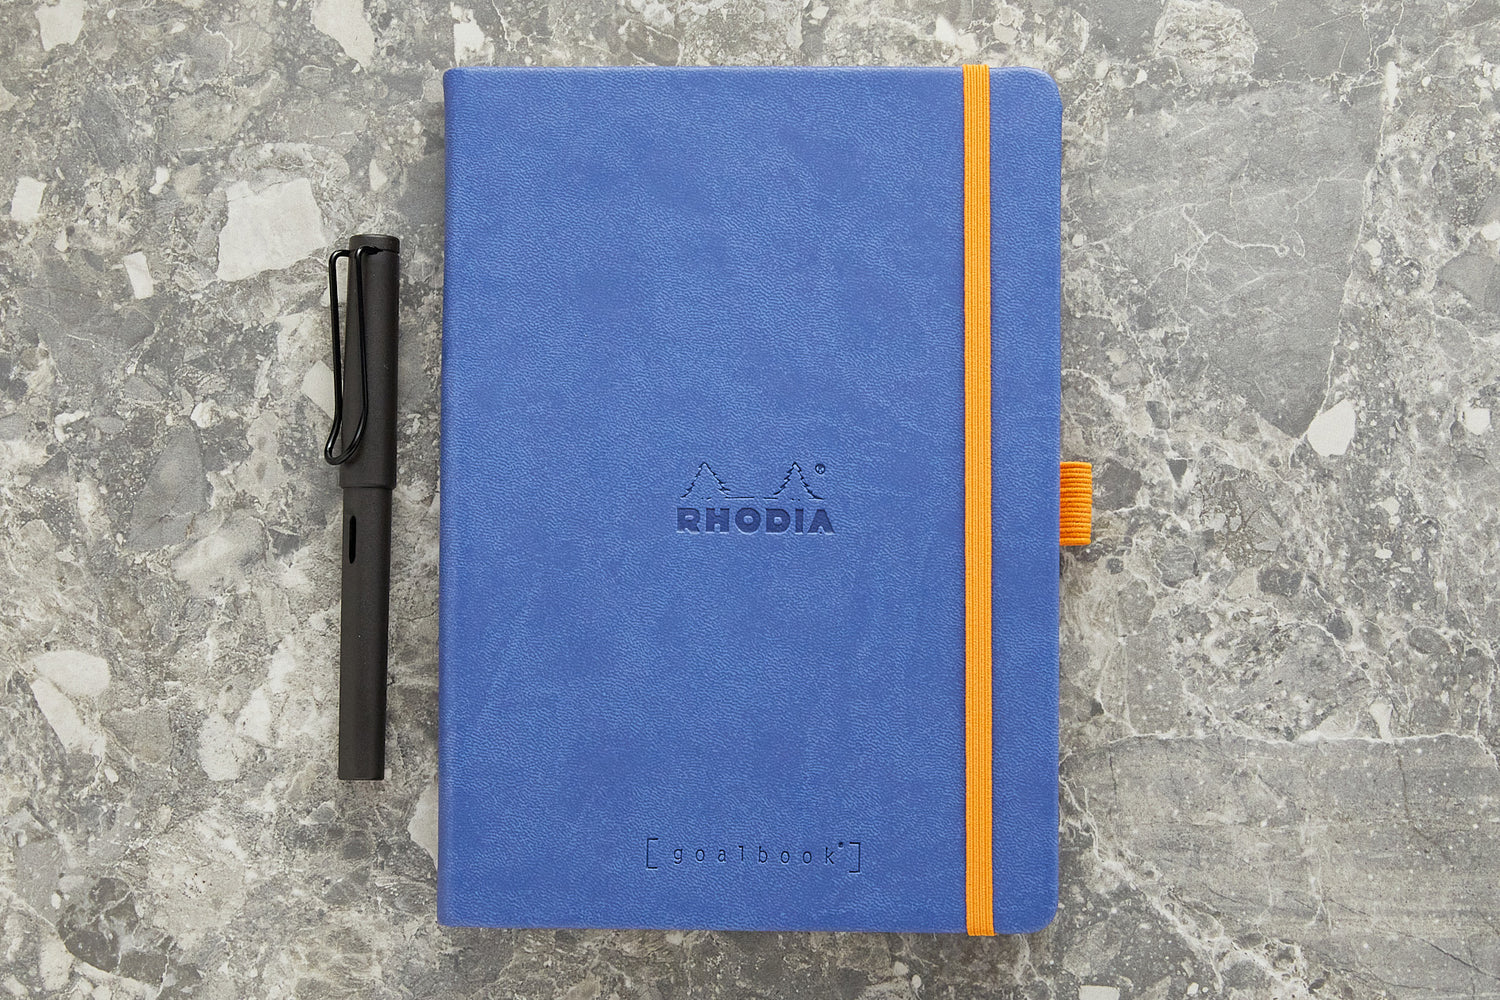 Rhodia Goalbook Dot Grid A5 Hardcover Journal - Sapphire (Ivory Paper) -  The Goulet Pen Company